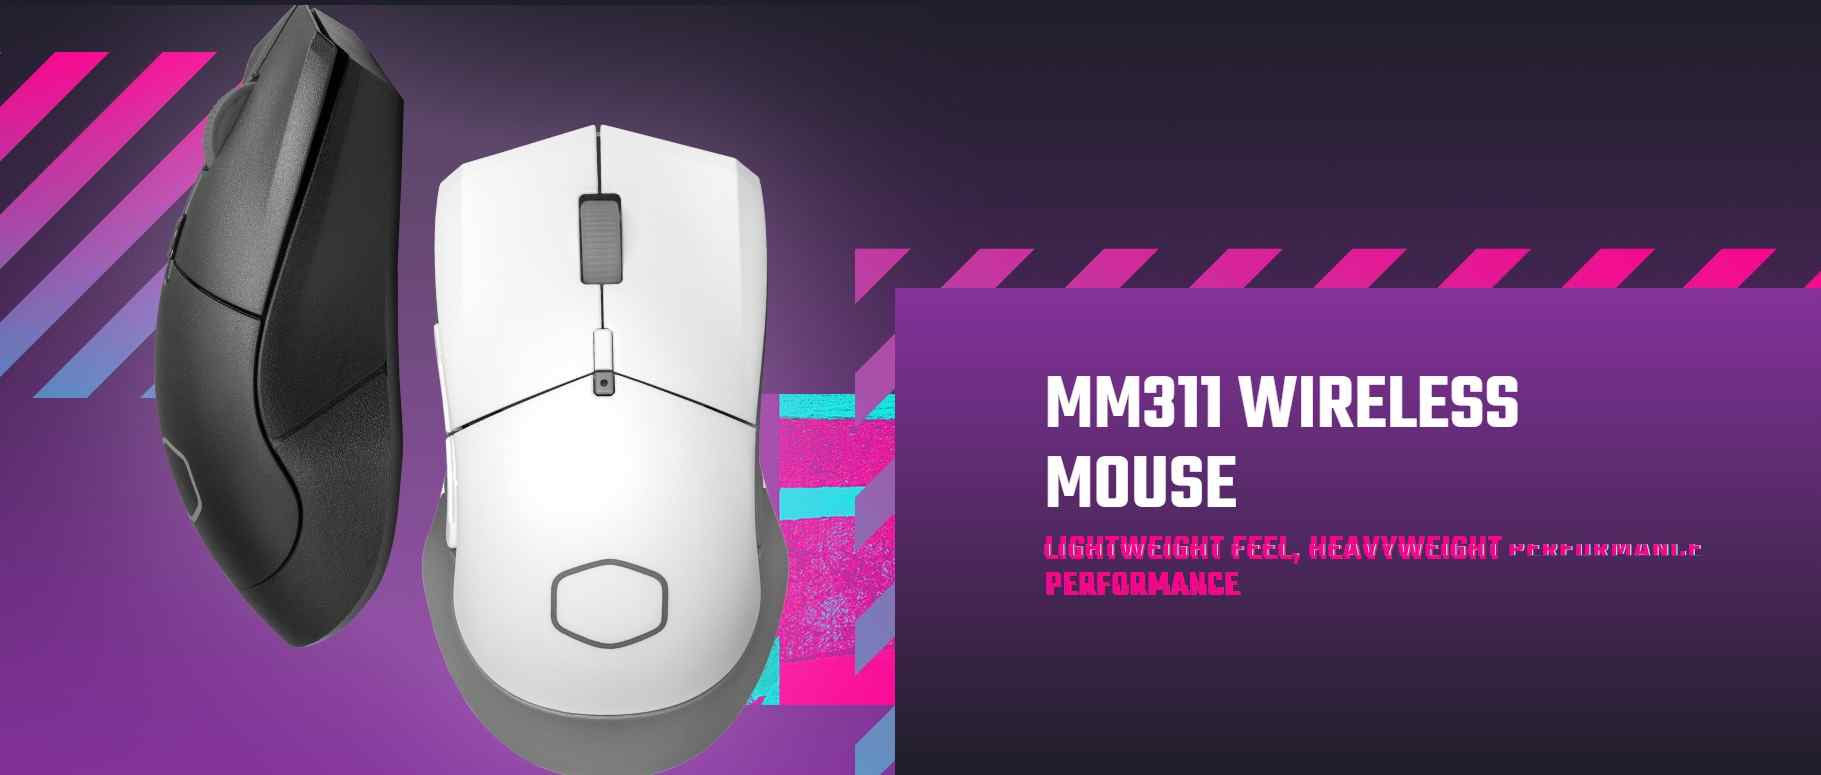 Cooler Master MasterMouse MM311 RGB Wireless Mouse - White [MM-311